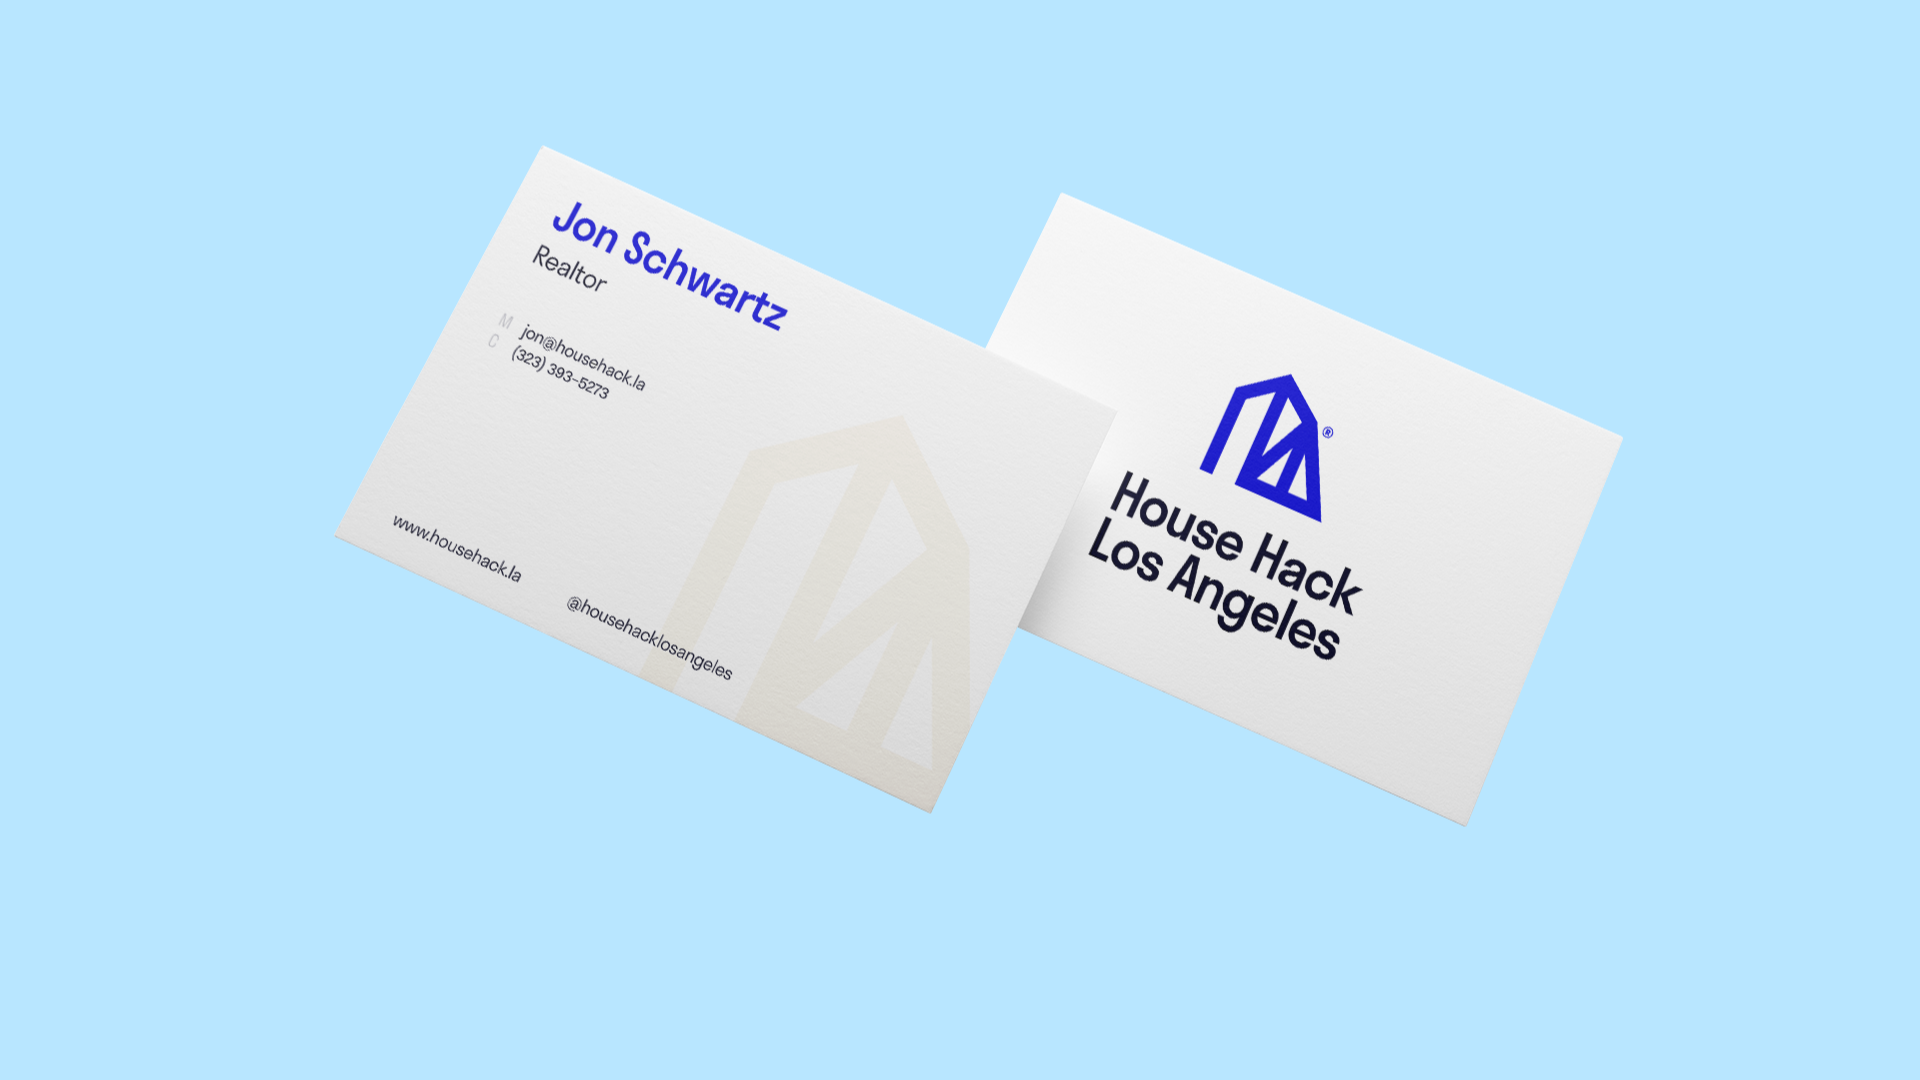 Business card for Jon Schwartz from House Hack Los Angeles